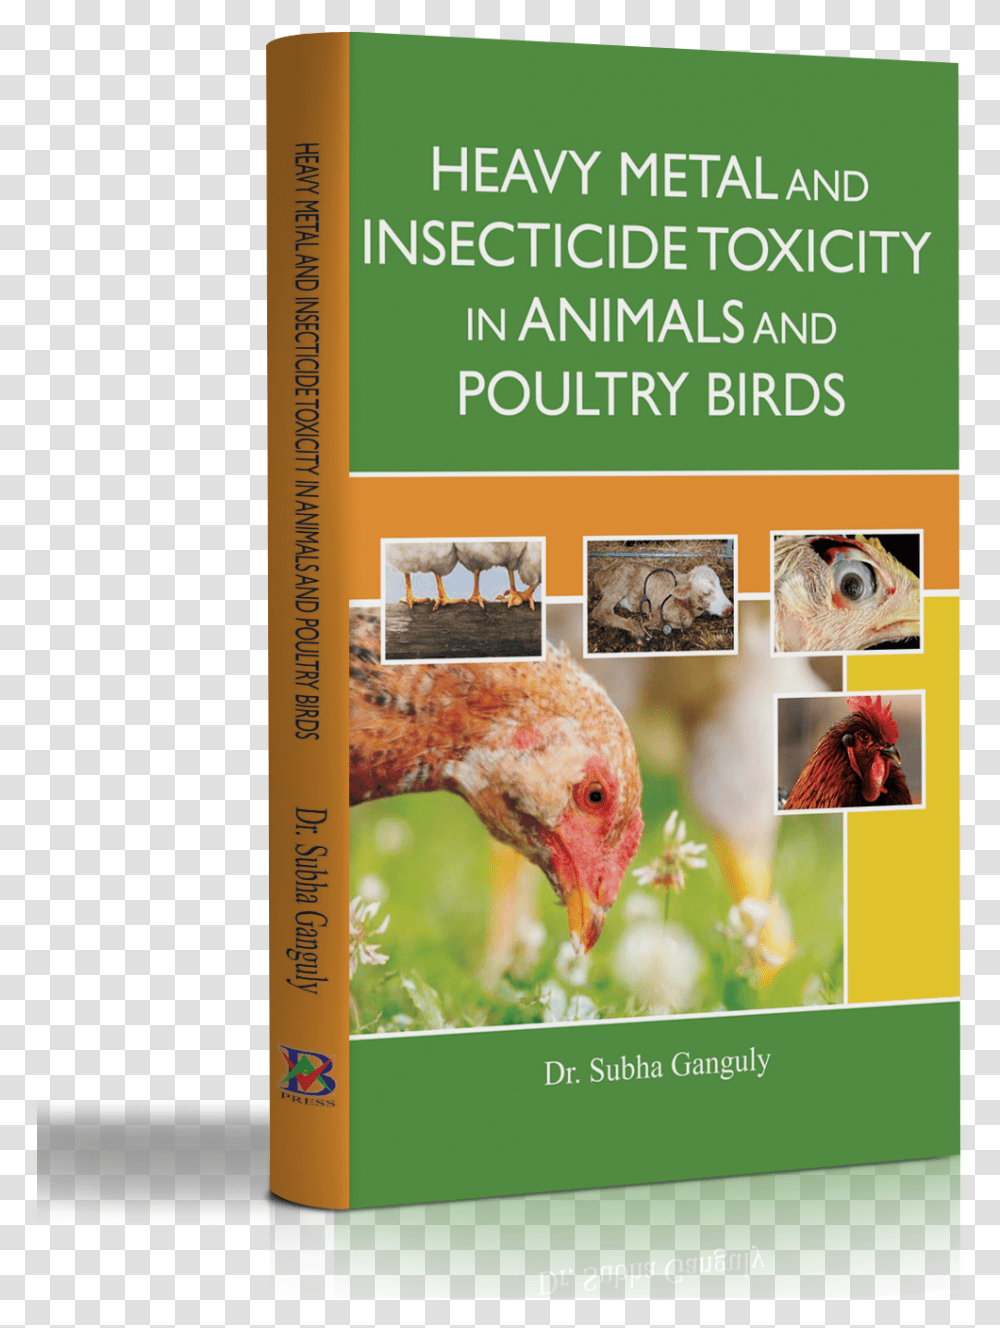 Heavy Metal And Insecticide Toxicity In Animals And Flyer, Poster, Advertisement, Bird, Paper Transparent Png